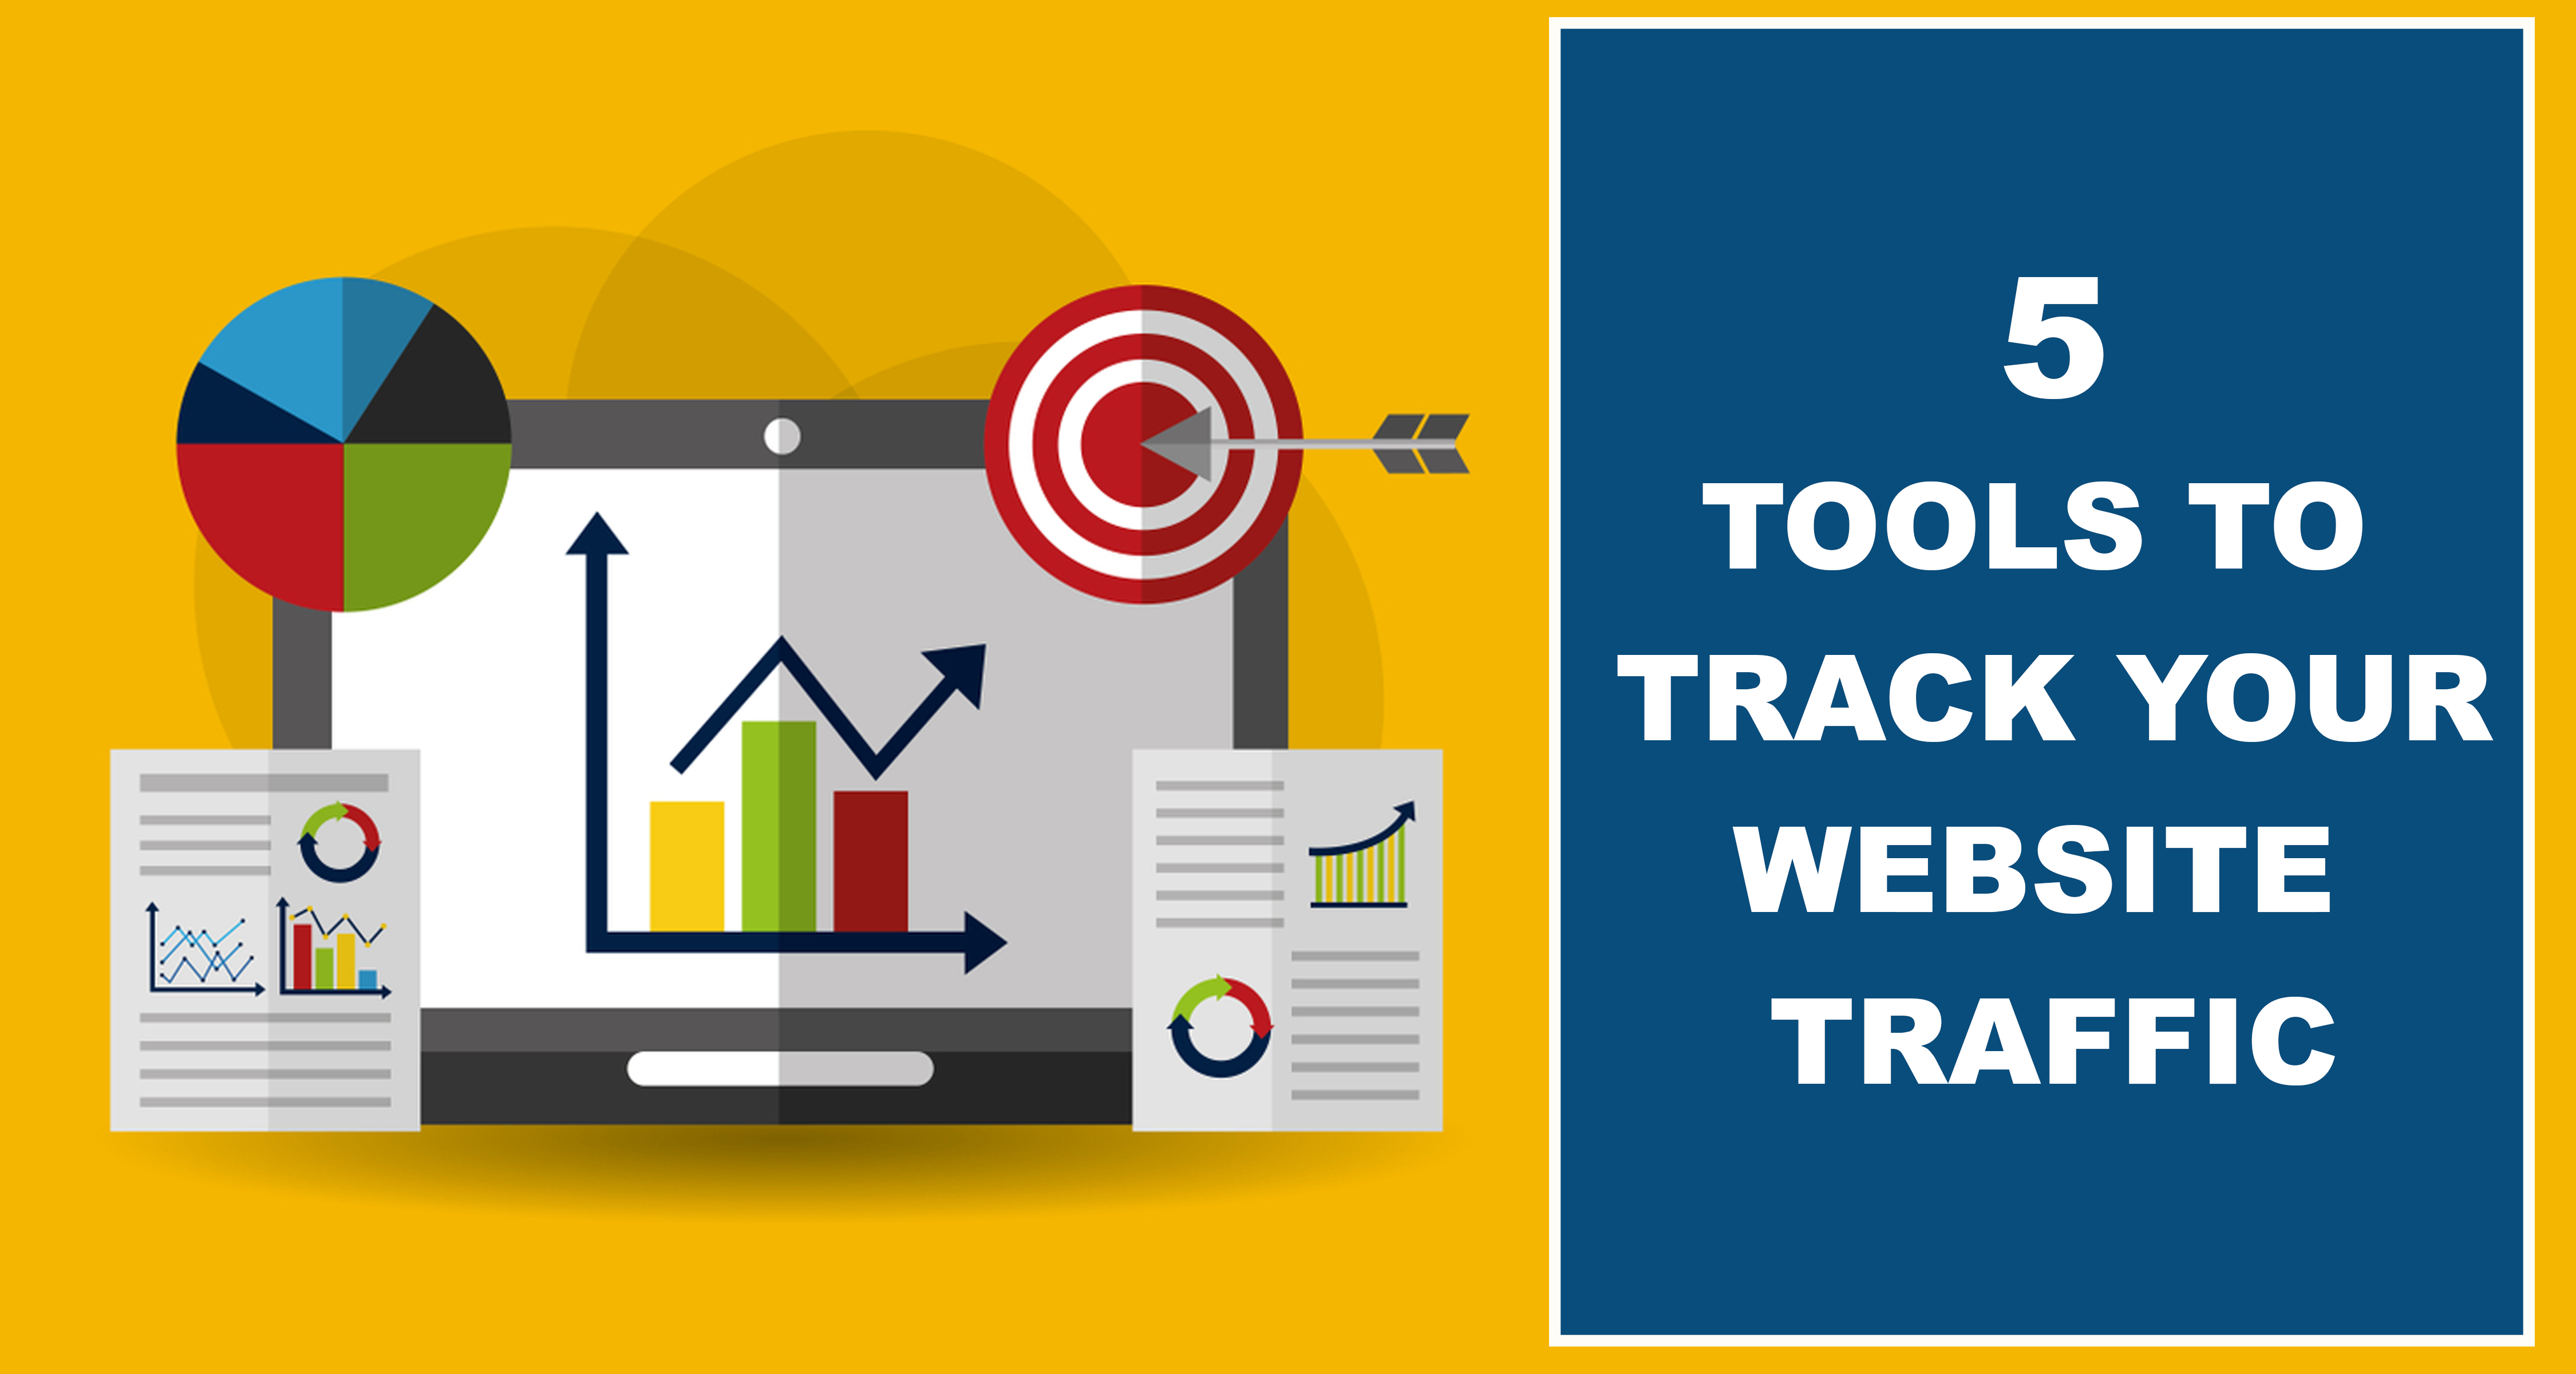 5 Tools To Track Your Website Traffic